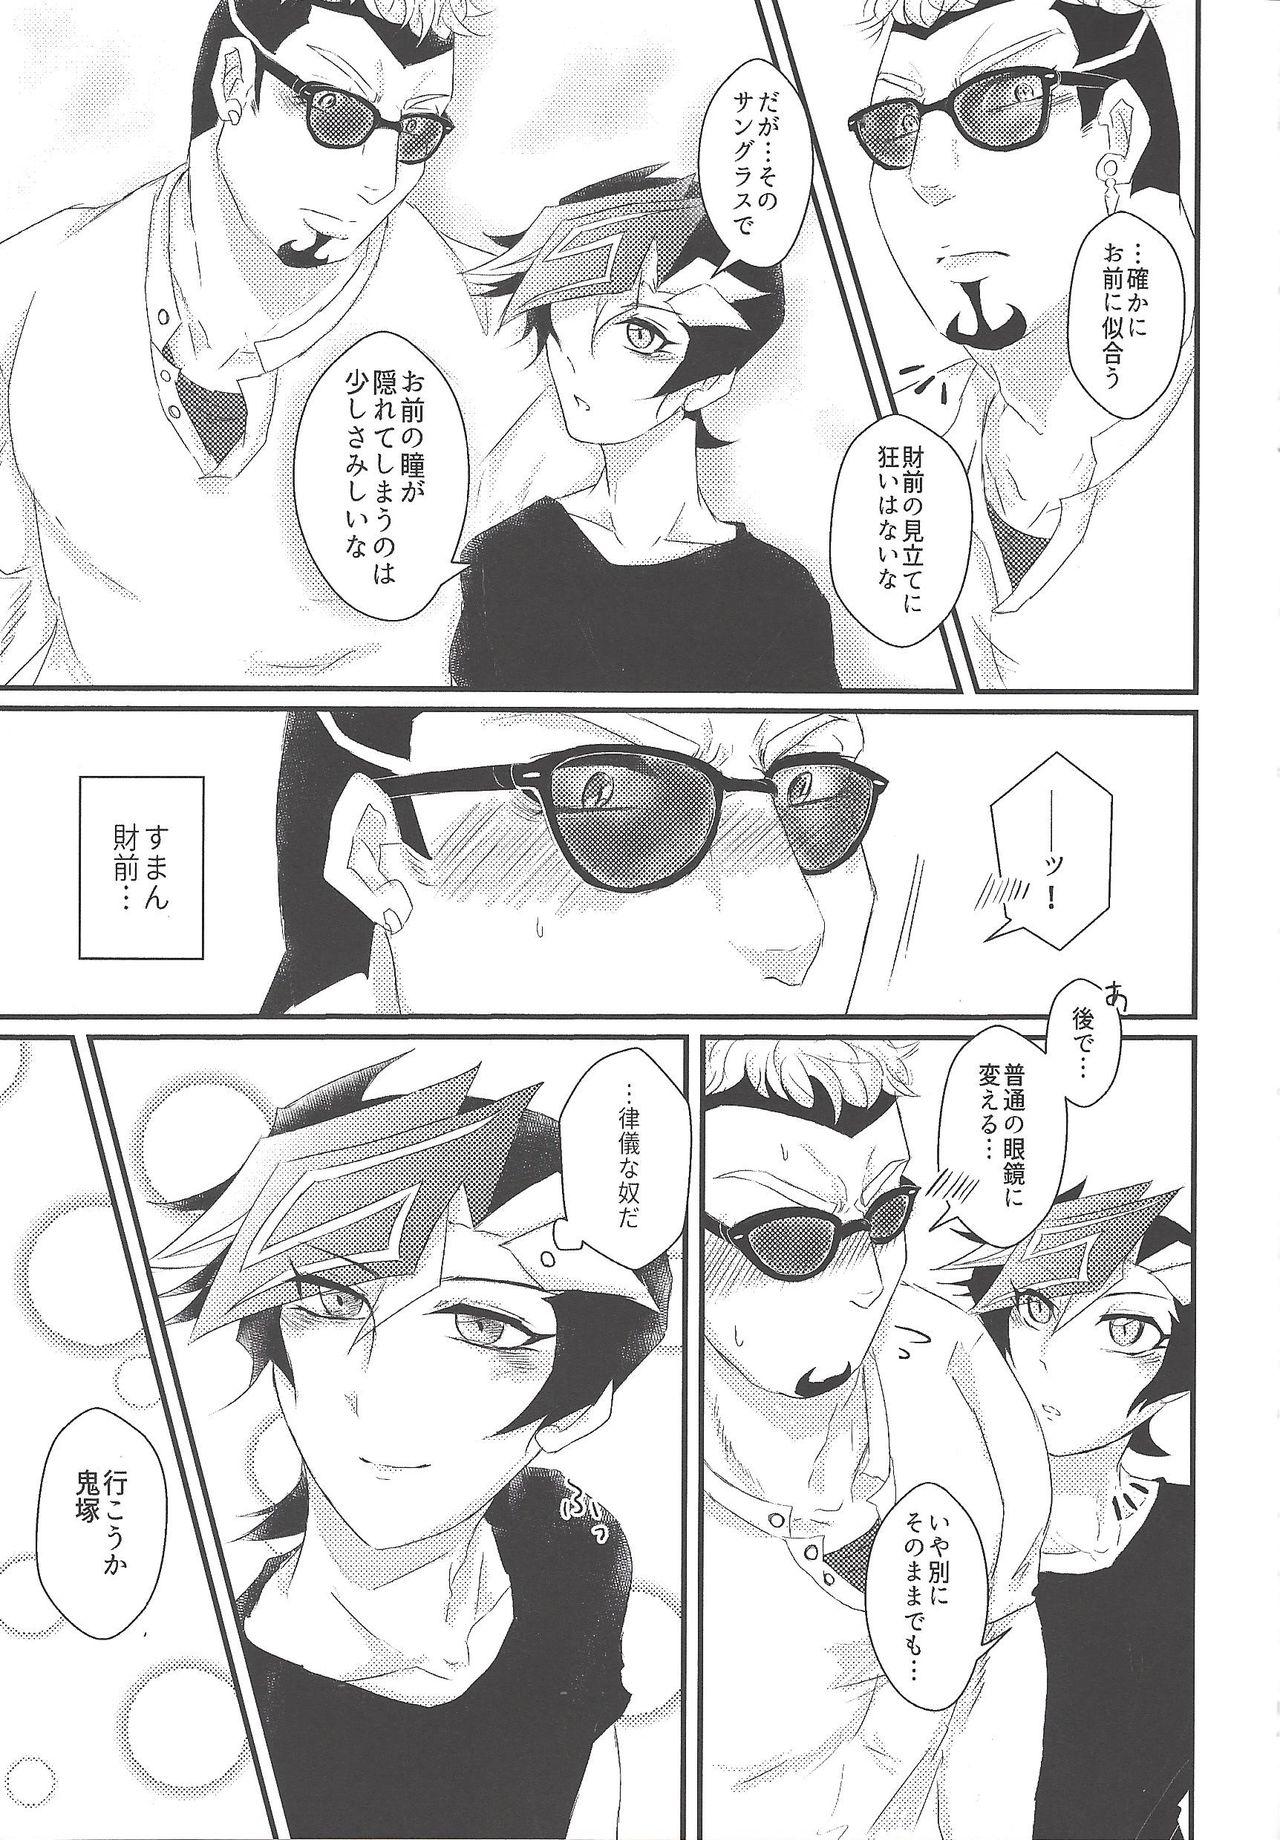 Tanned with you - Yu gi oh vrains Wet - Page 8